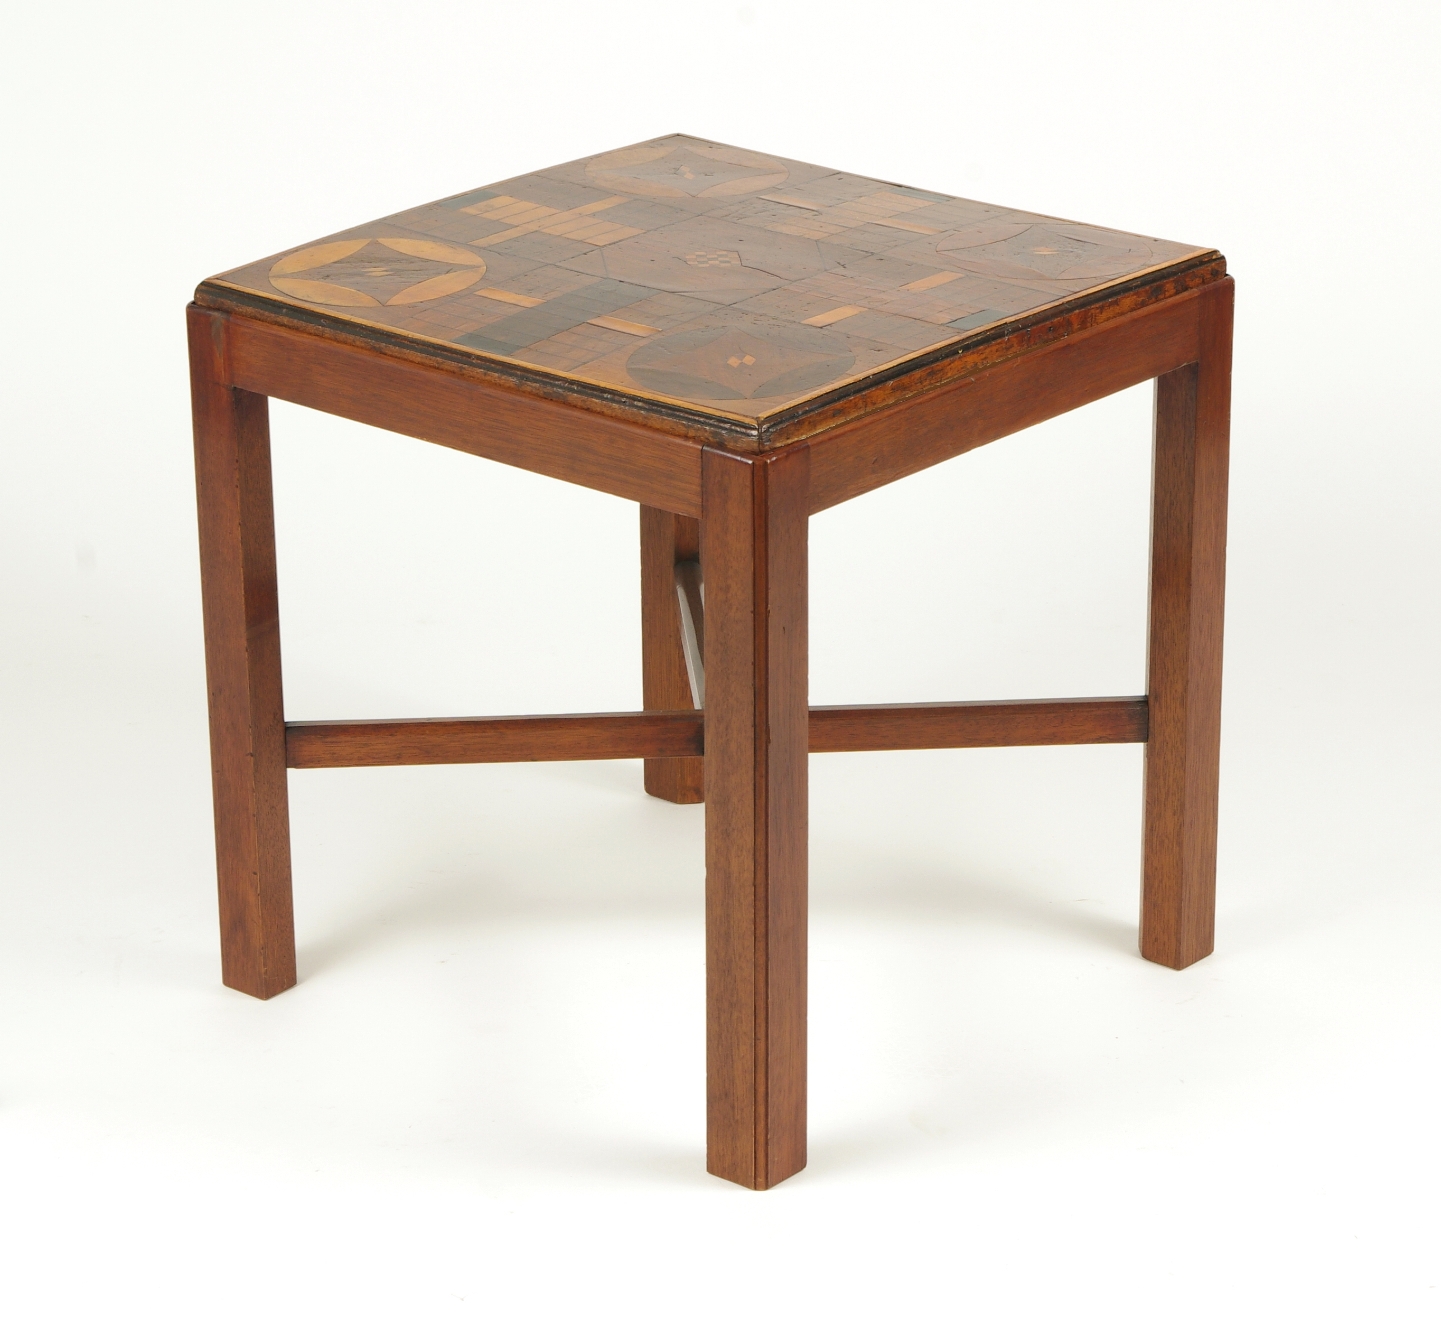 Inlaid Parcheesi Board Mounted as a Table, 19th c.